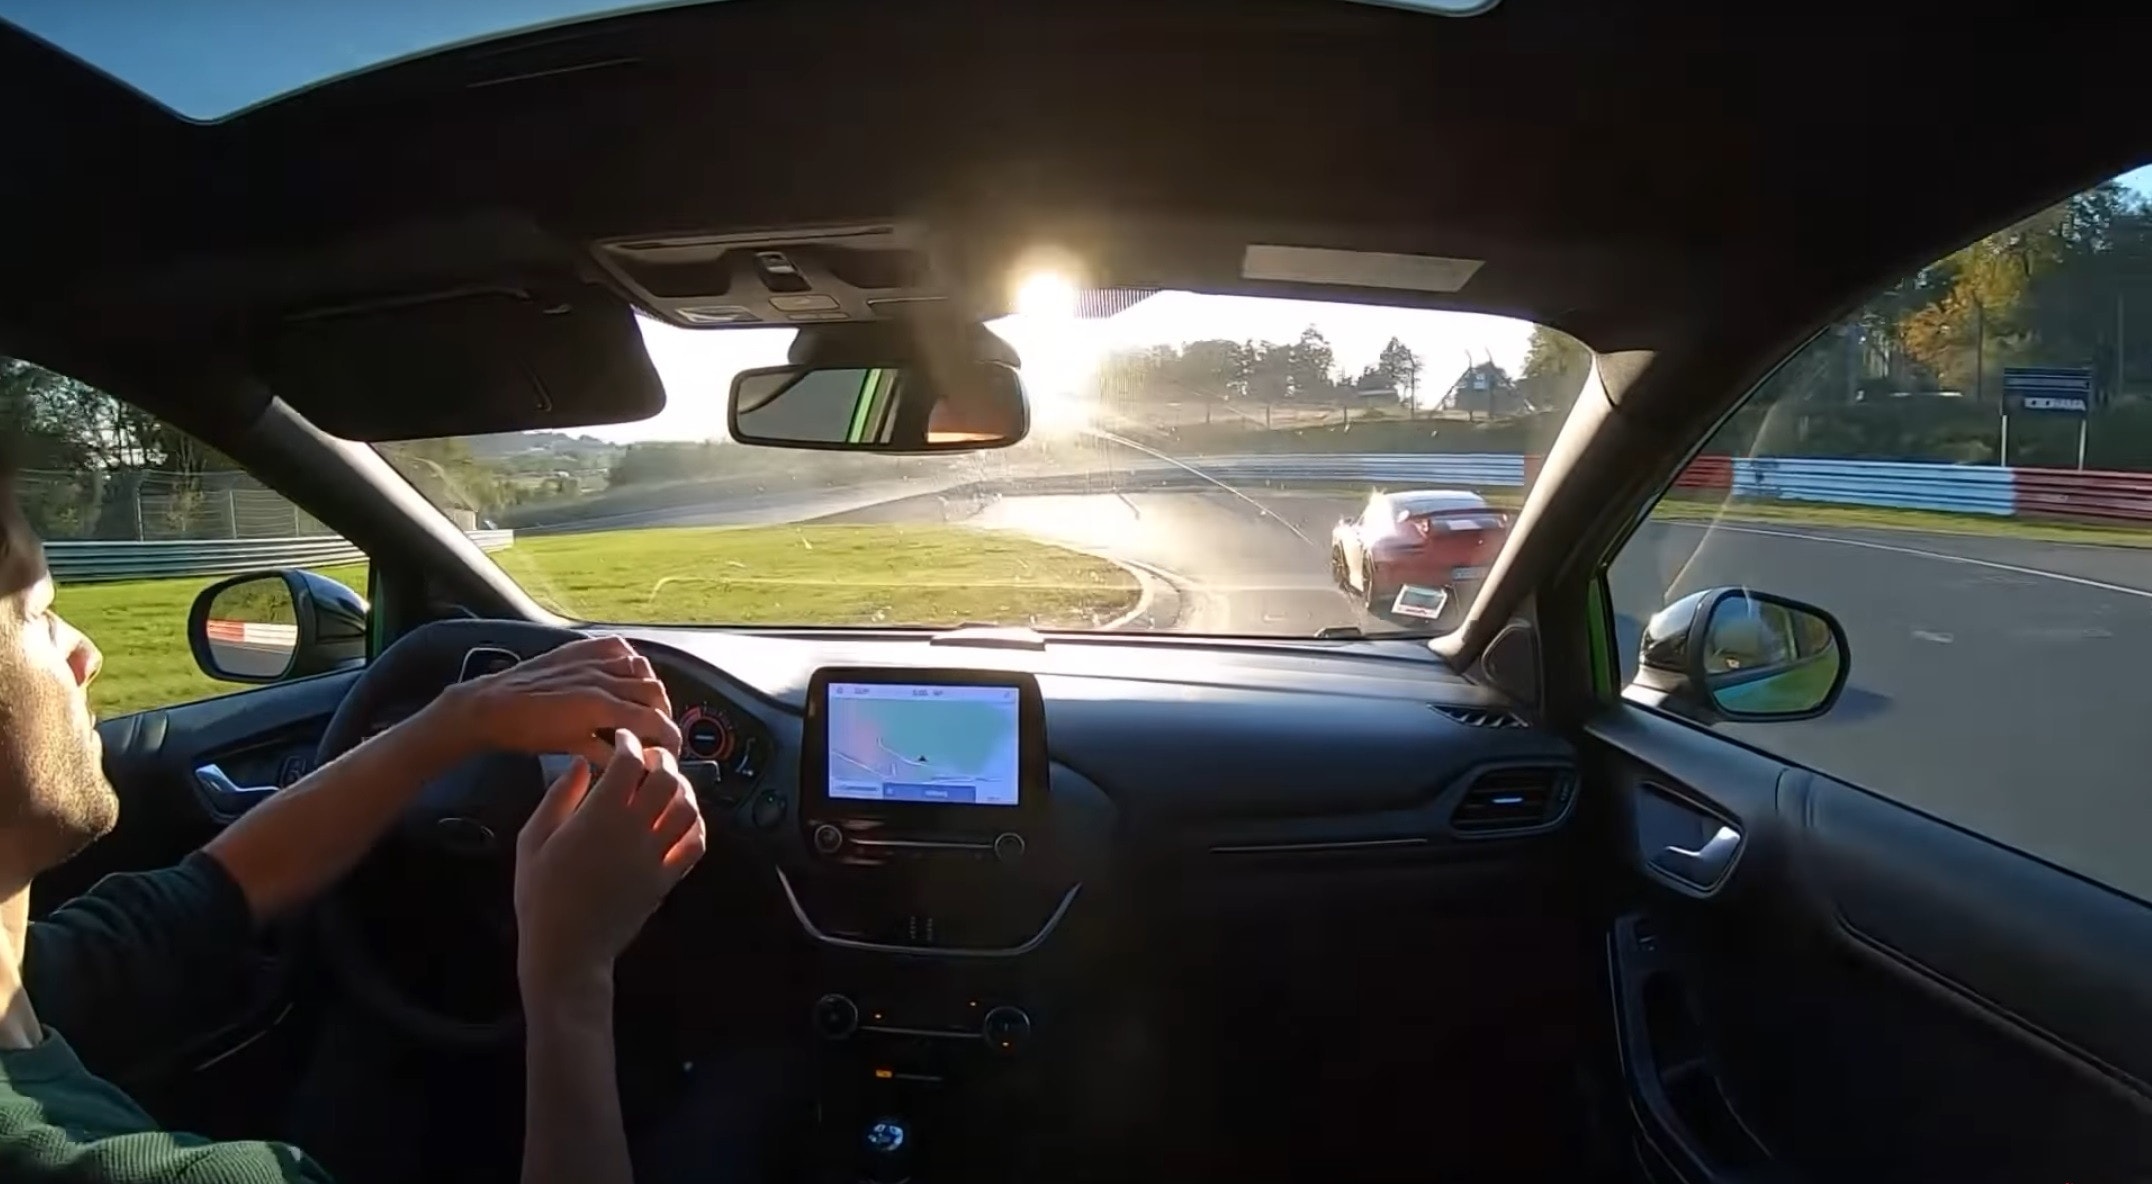 Mk8 Ford Fiesta ST With Mountune m260 Upgrade Promises Exhilarating  Performance - autoevolution